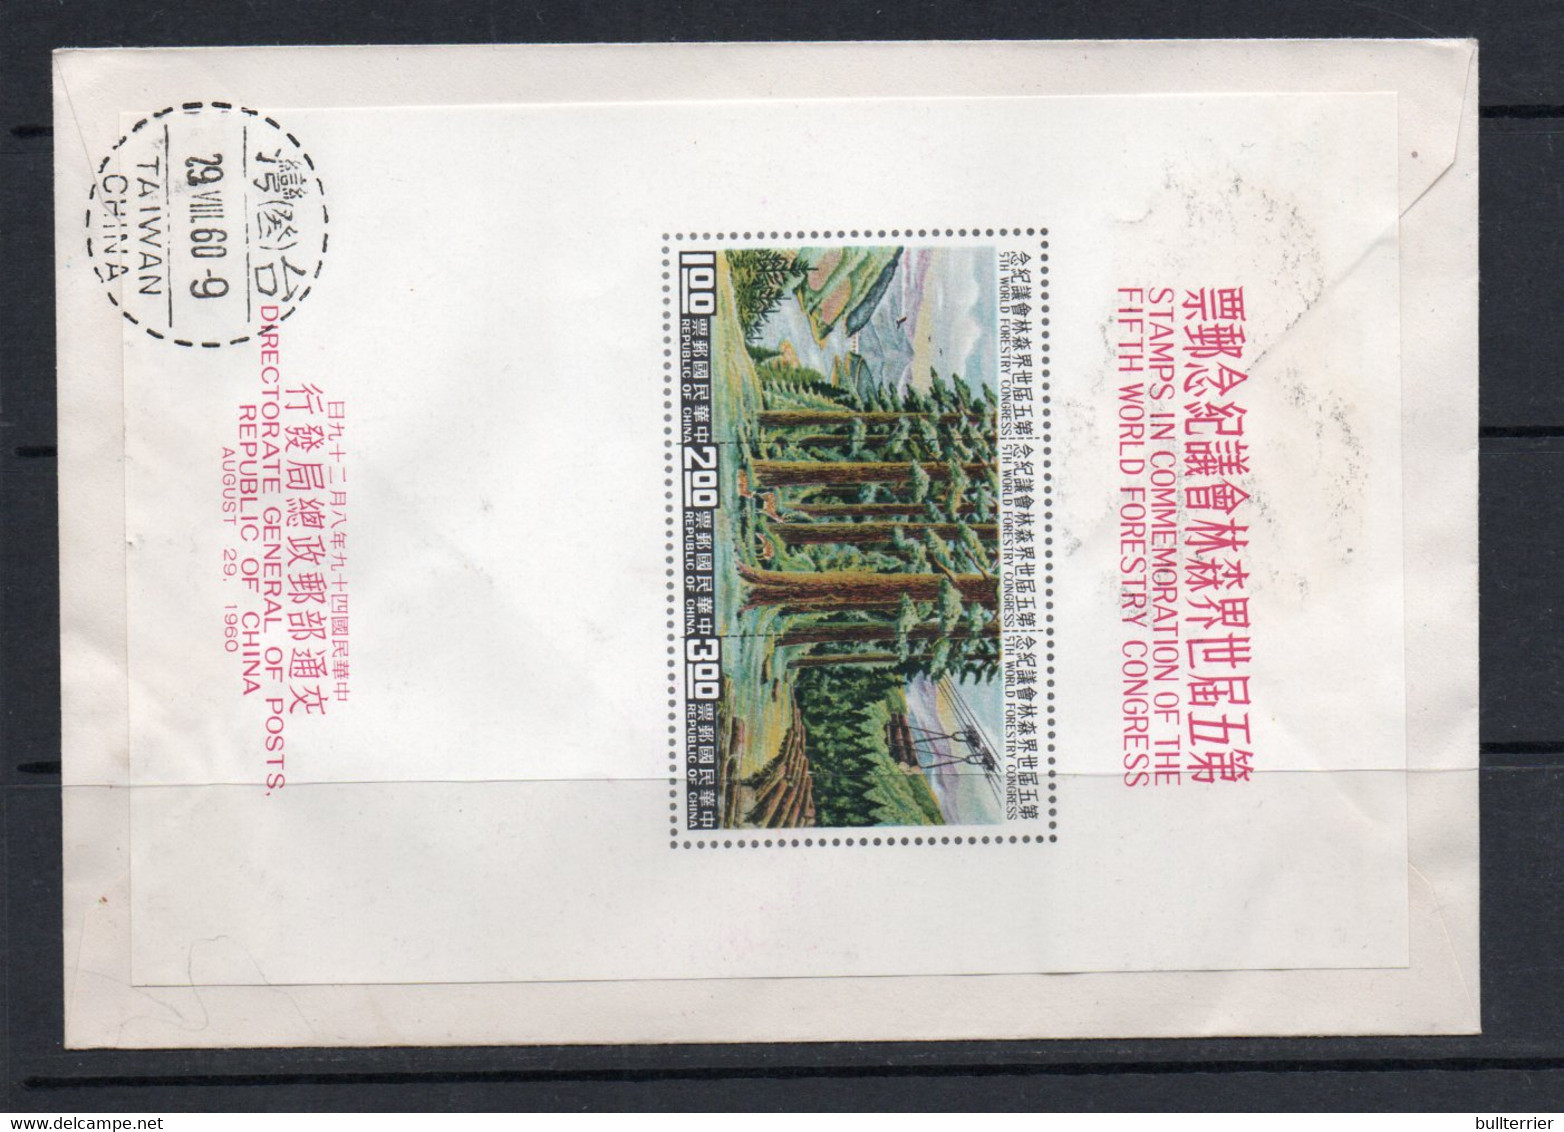 TAIWAN - 1960 FORESTRY SOUVENIR SHEET ON FIRST DAY COVER - Covers & Documents